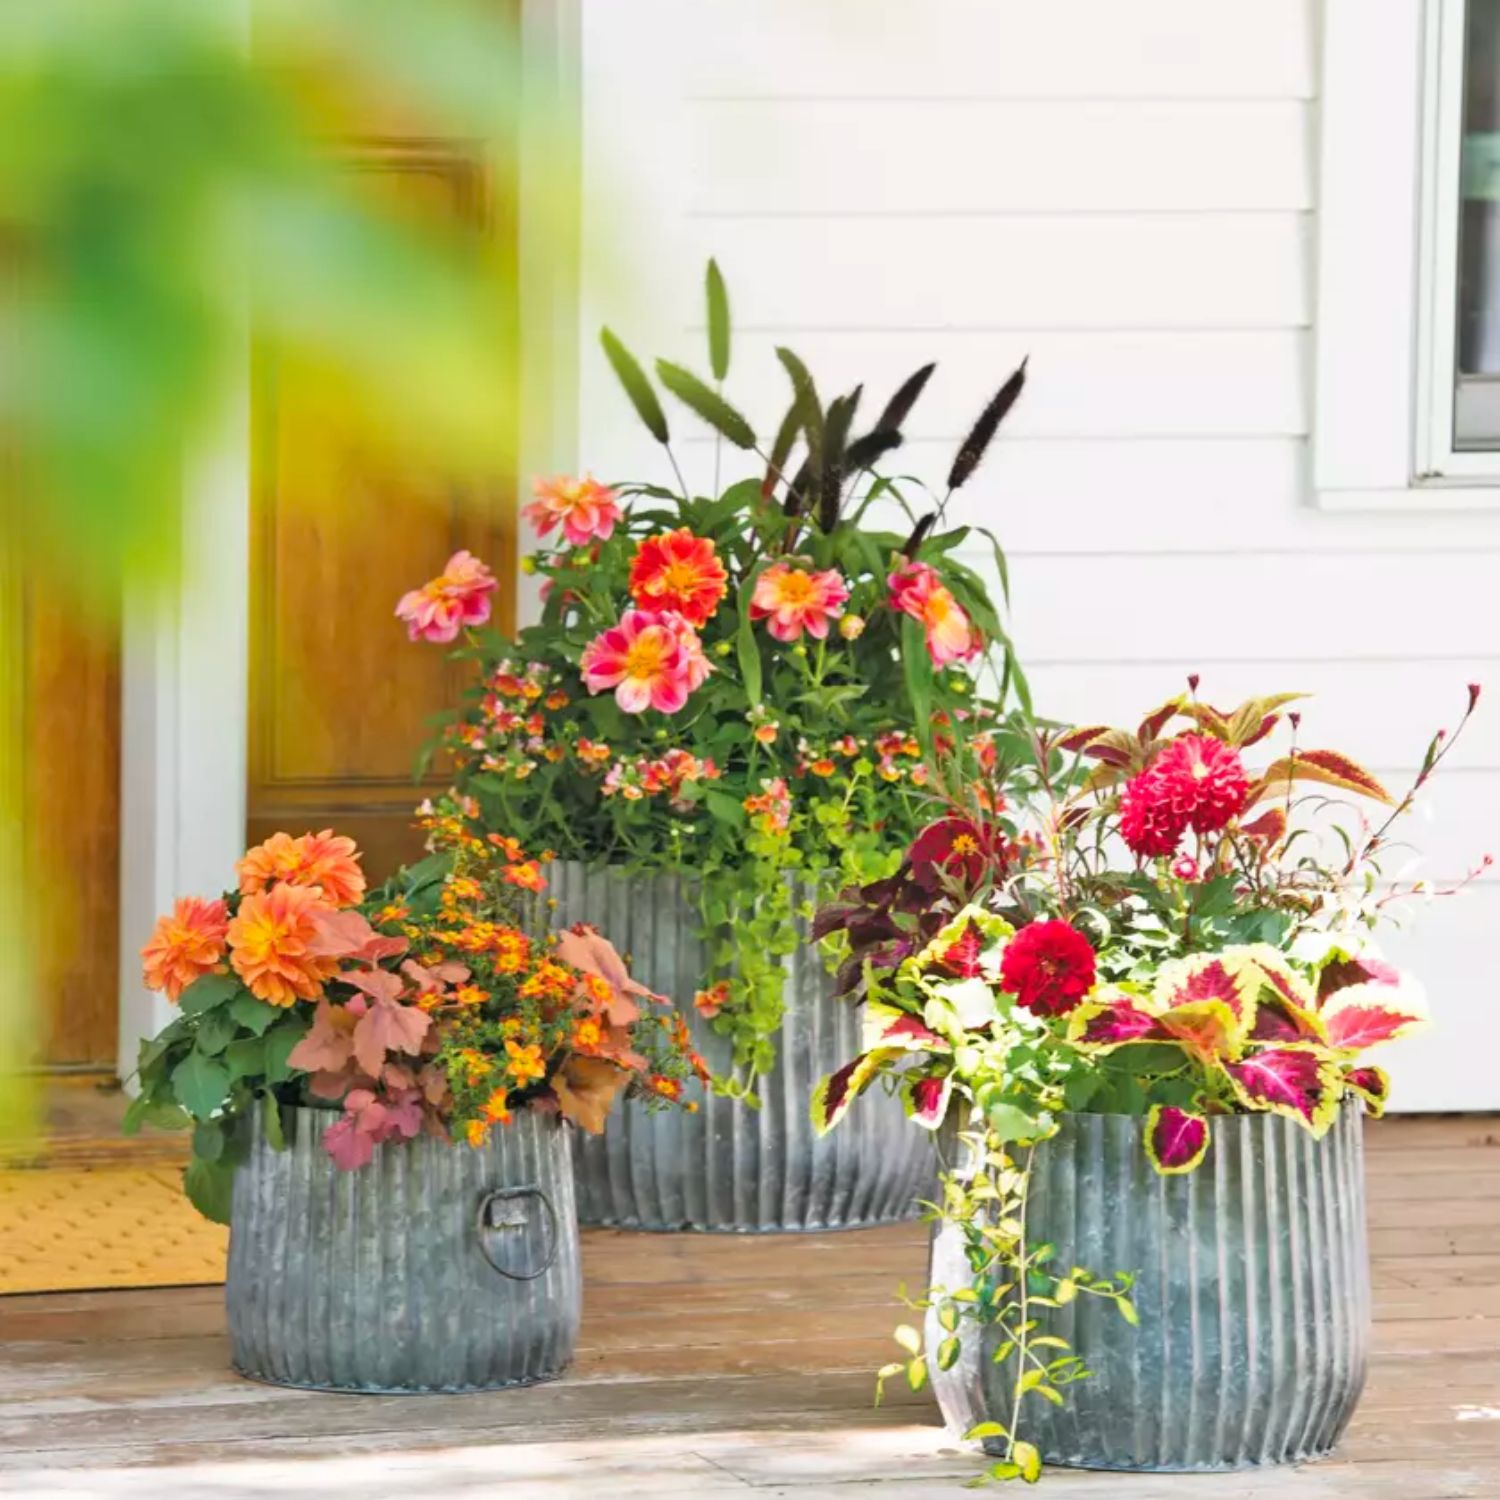 Our Favorite Online Garden Stores for Seeds Plants Supplies and More: Gardener’s Supply Company